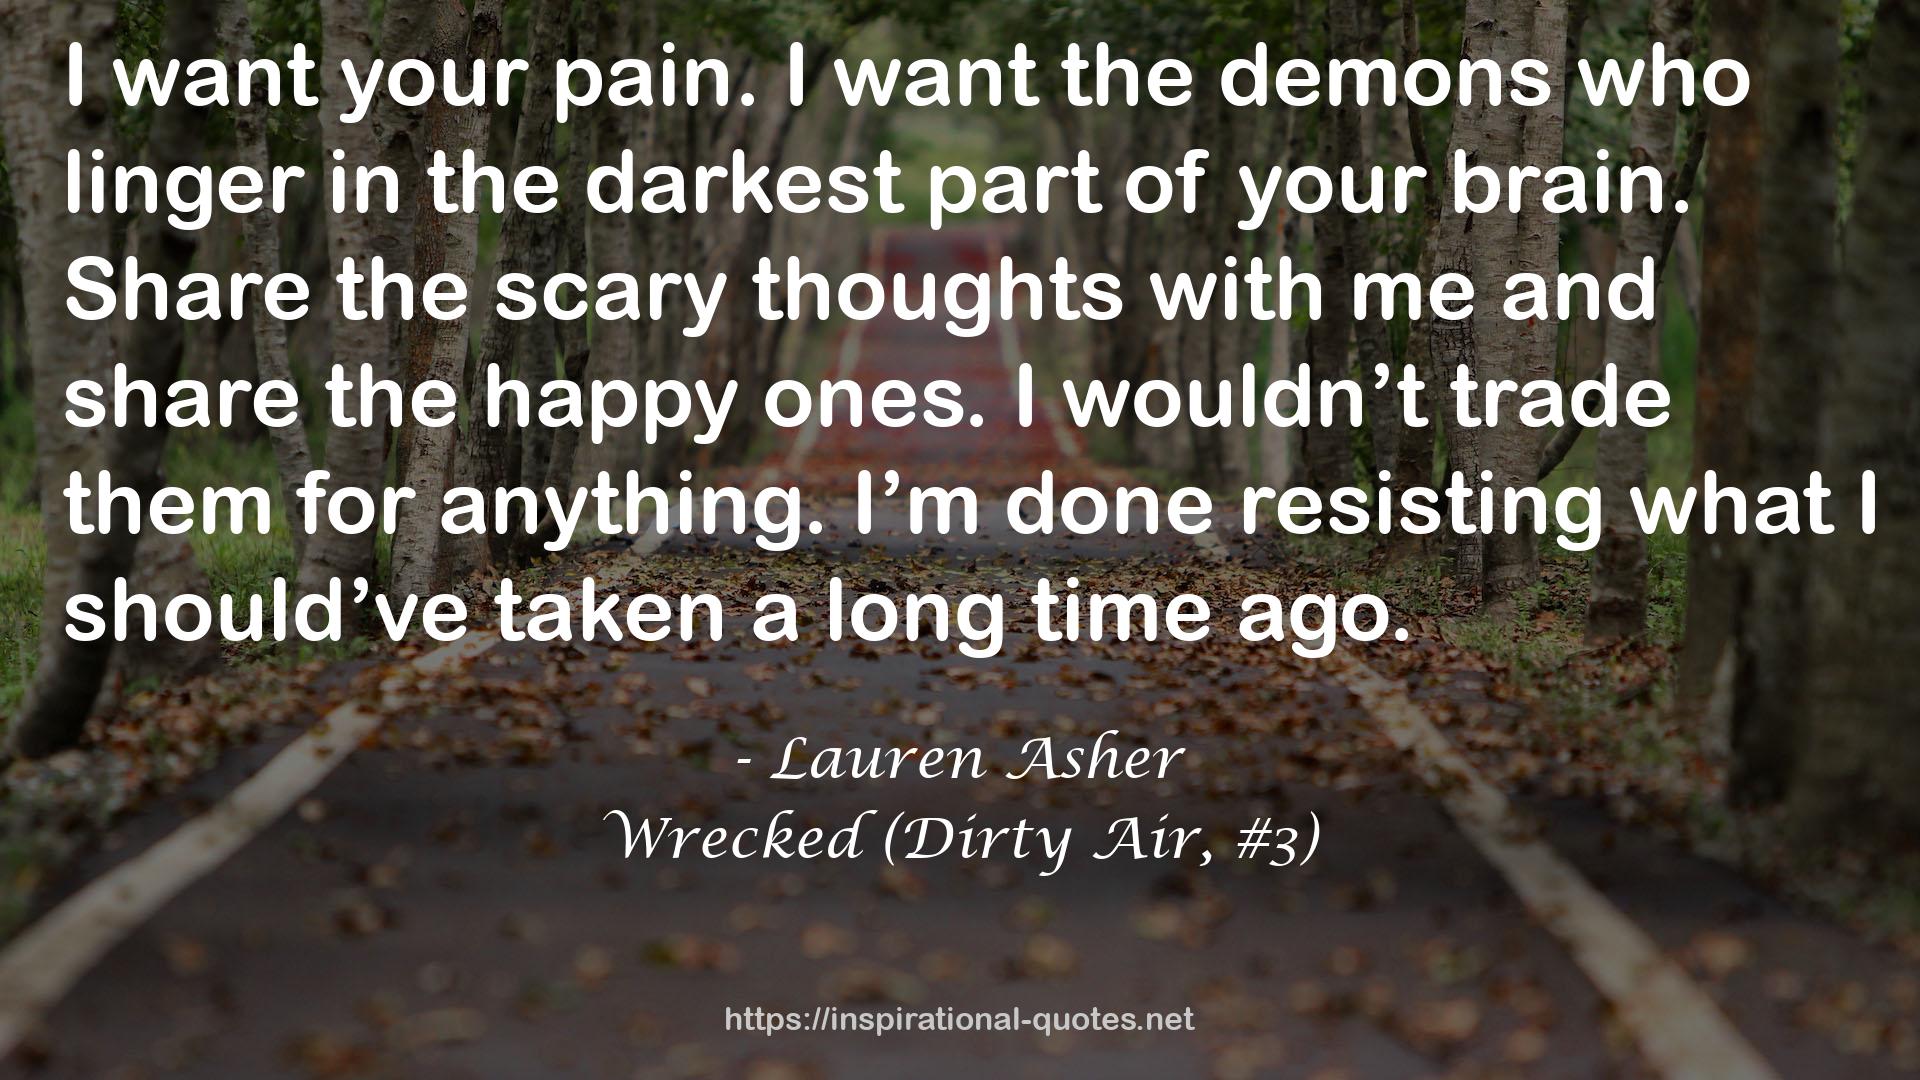 Wrecked (Dirty Air, #3) QUOTES